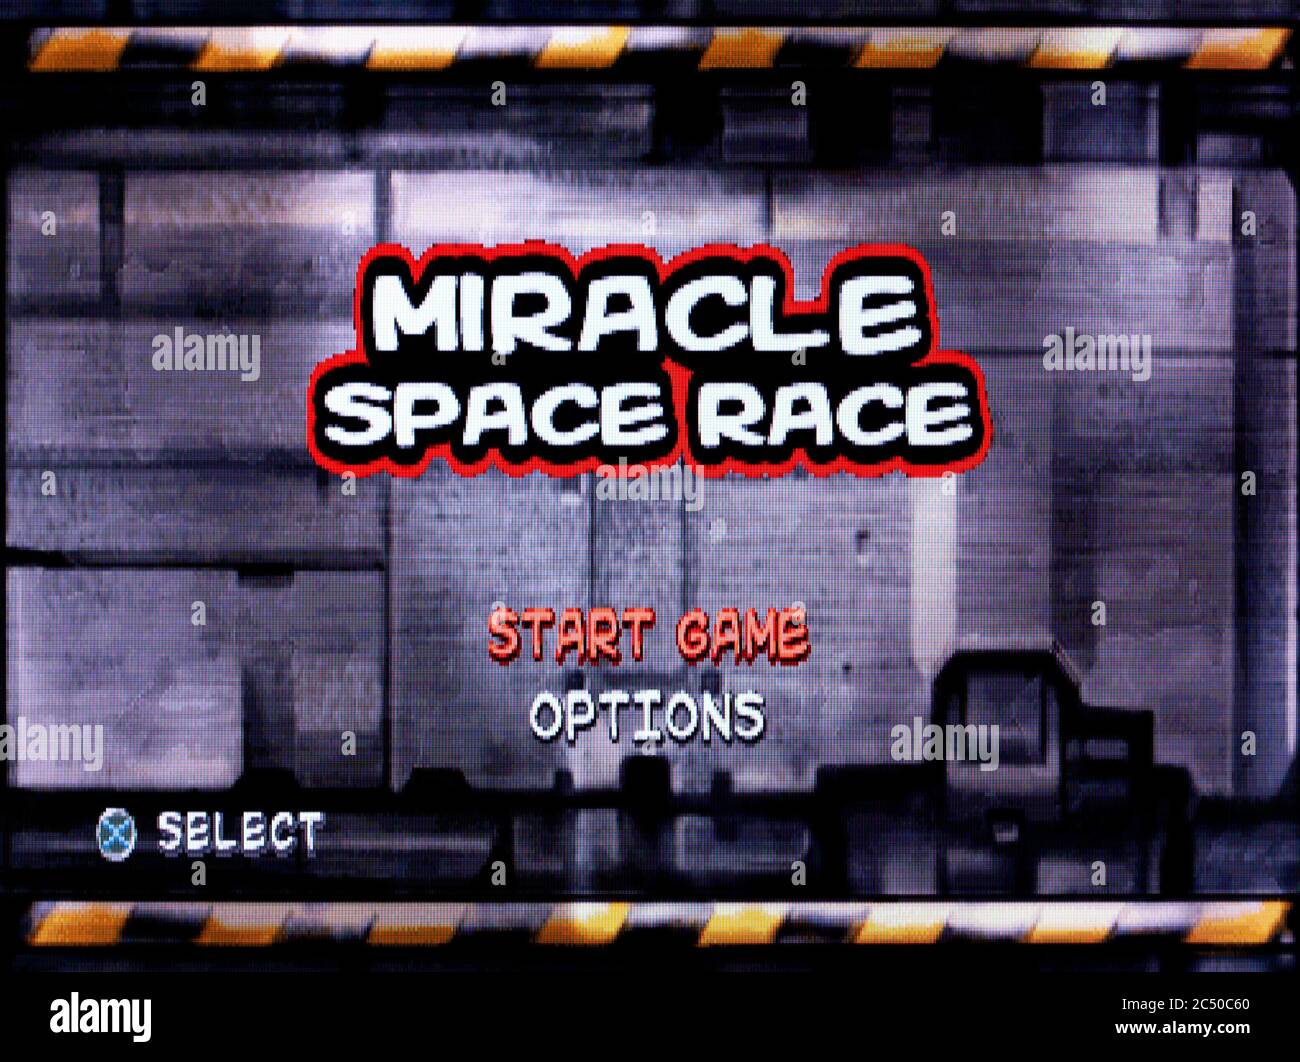 Miracle Space Race - Sony PlayStation 1 PS1 PSX - solo para uso editorial Foto de stock